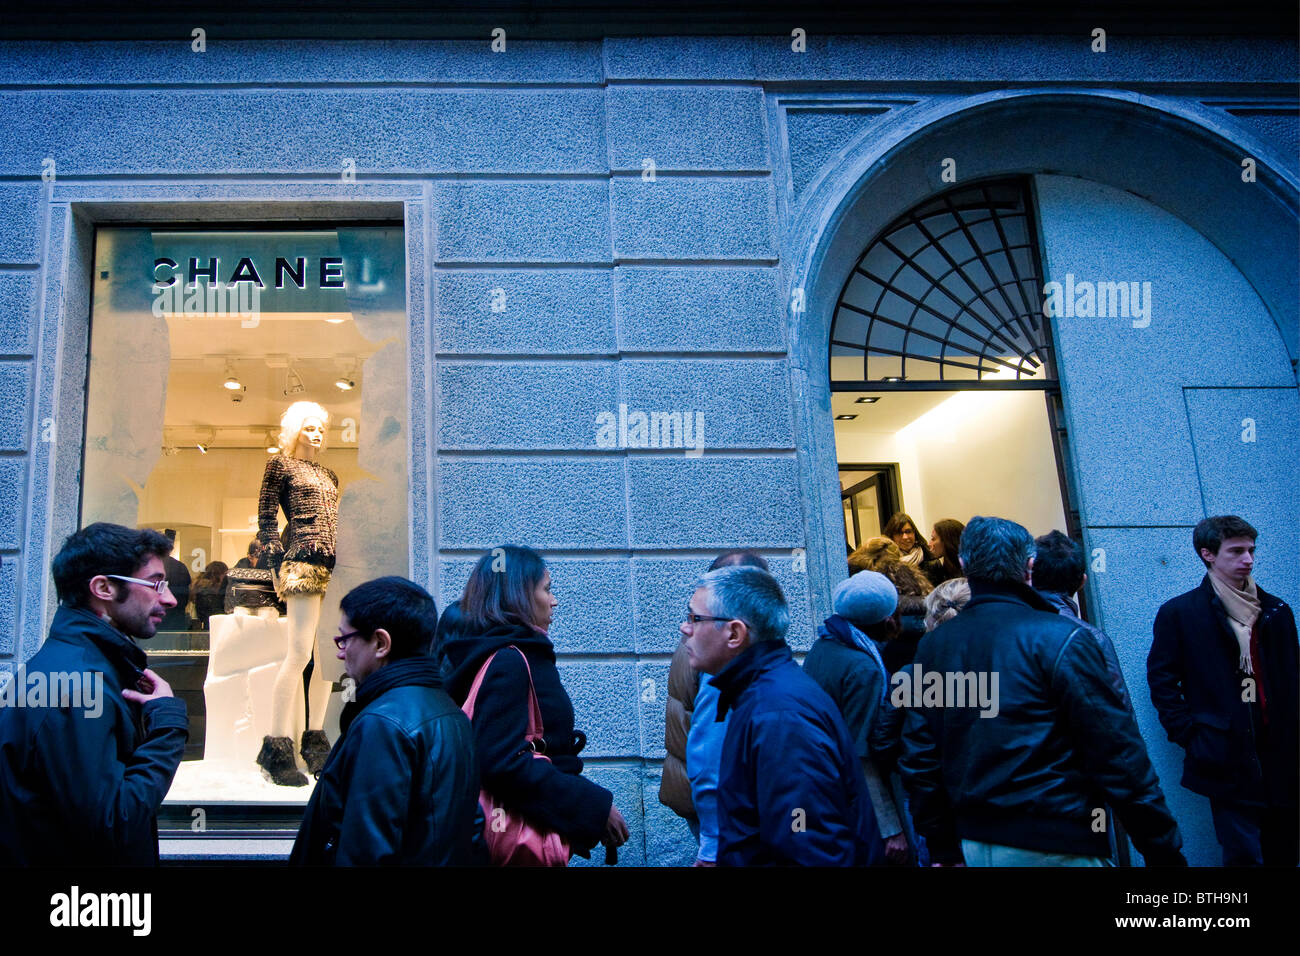 Chanel Opens “Twin” Boutique in Milan